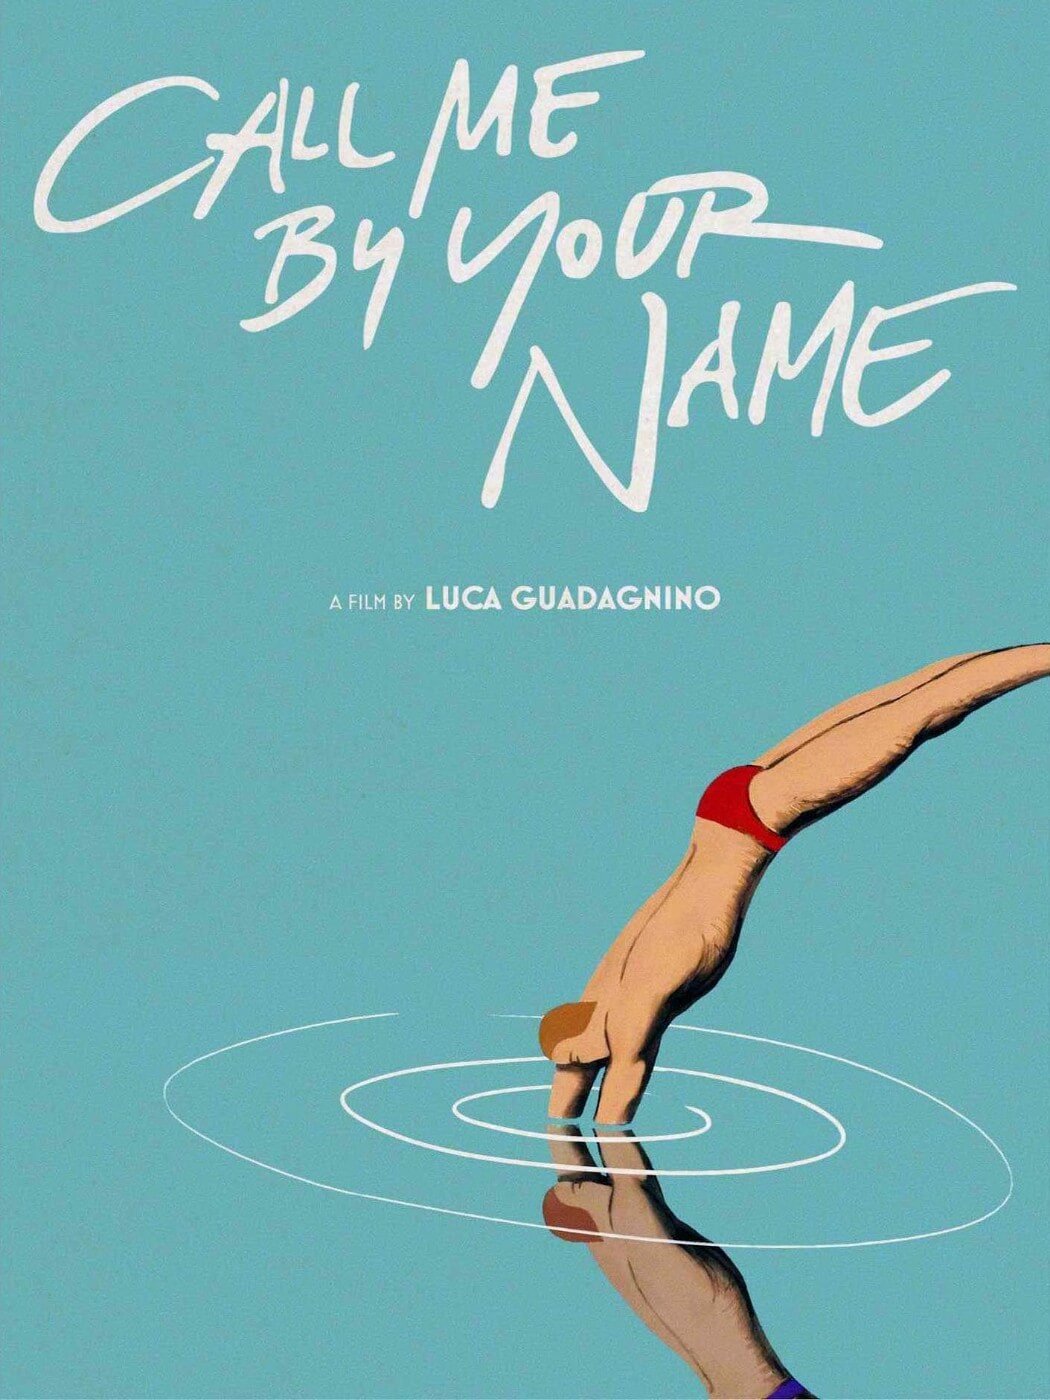 Call Me By Your Name Movie Poster Canvas Poster Bedroom Art Without Frame Prints Giclee Shamsaco Ir